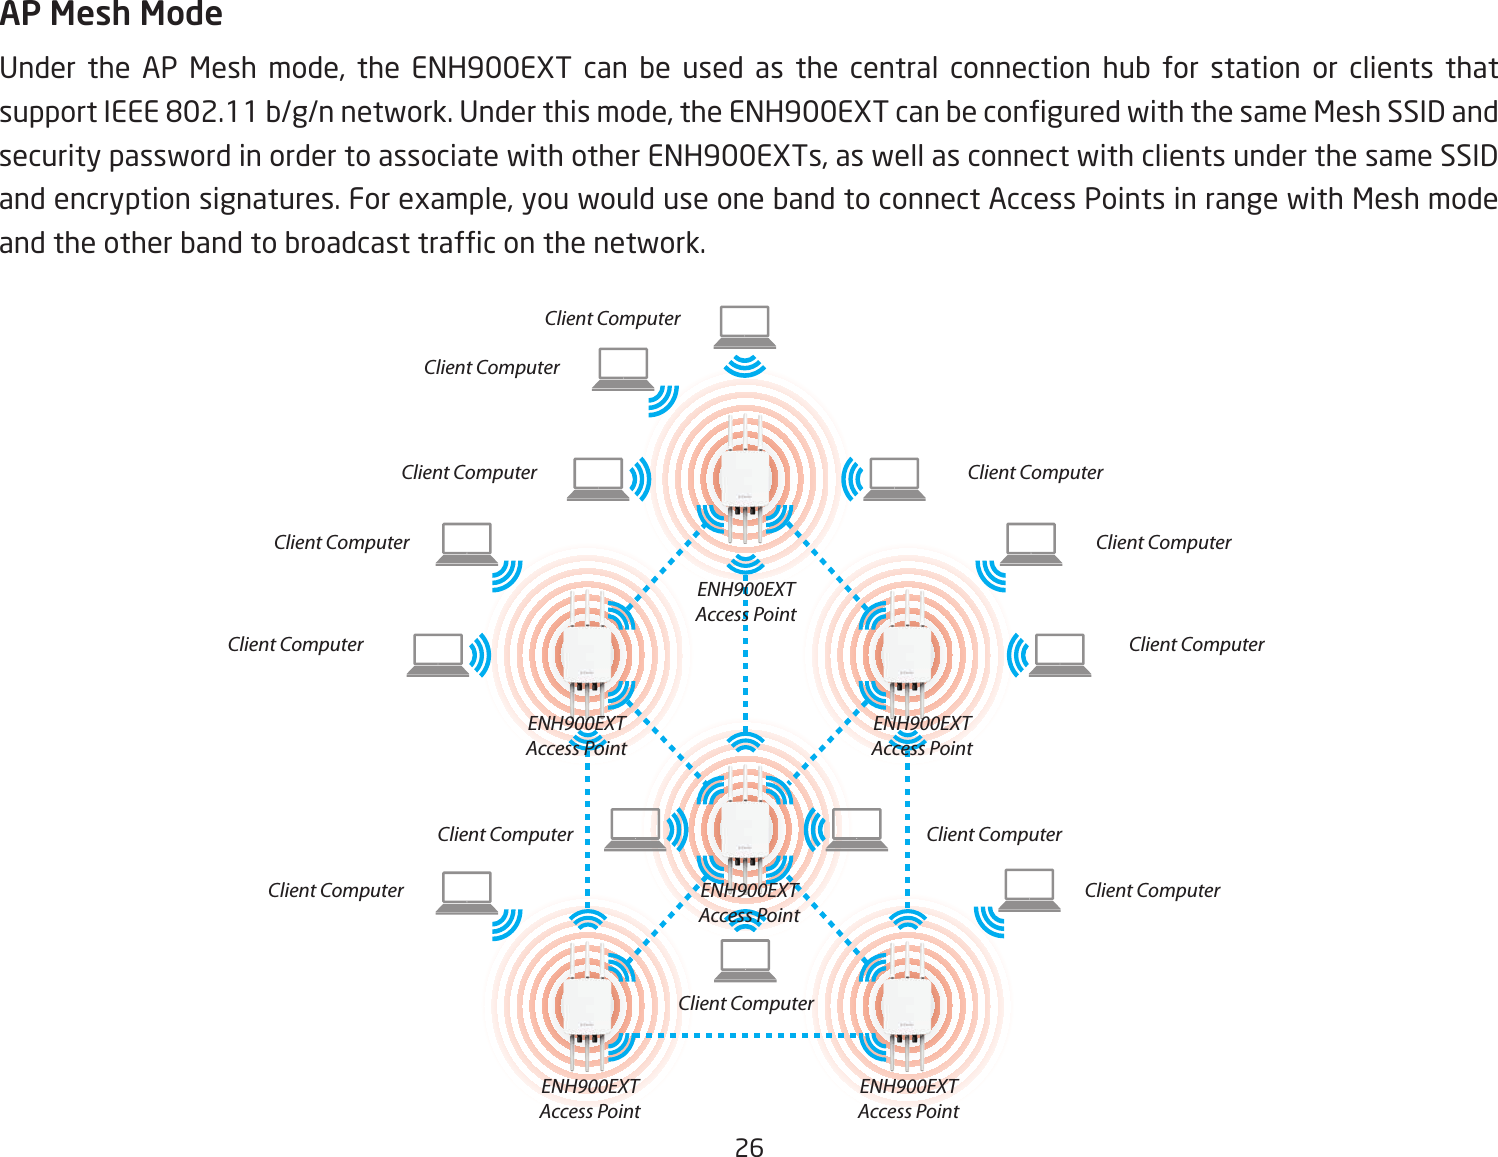 26AP Mesh ModeUnder the AP Mesh mode, the ENH900EXT can be used as the central connection hub for station or clients thatsupportIEEE802.11b/g/nnetwork.Underthismode,theENH900EXTcanbeconguredwiththesameMeshSSIDandsecurity password in order to associate with other ENH900EXTs, as well as connect with clients under the same SSID and encryption signatures. For example, you would use one band to connect Access Points in range with Mesh mode andtheotherbandtobroadcasttrafconthenetwork.Client ComputerClient ComputerClient ComputerClient ComputerClient ComputerClient ComputerClient ComputerClient ComputerClient ComputerClient ComputerClient ComputerClient ComputerClient ComputerENH900EXTAccess PointENH900EXTAccess PointENH900EXTAccess PointENH900EXTAccess PointENH900EXTAccess PointENH900EXTAccess Point